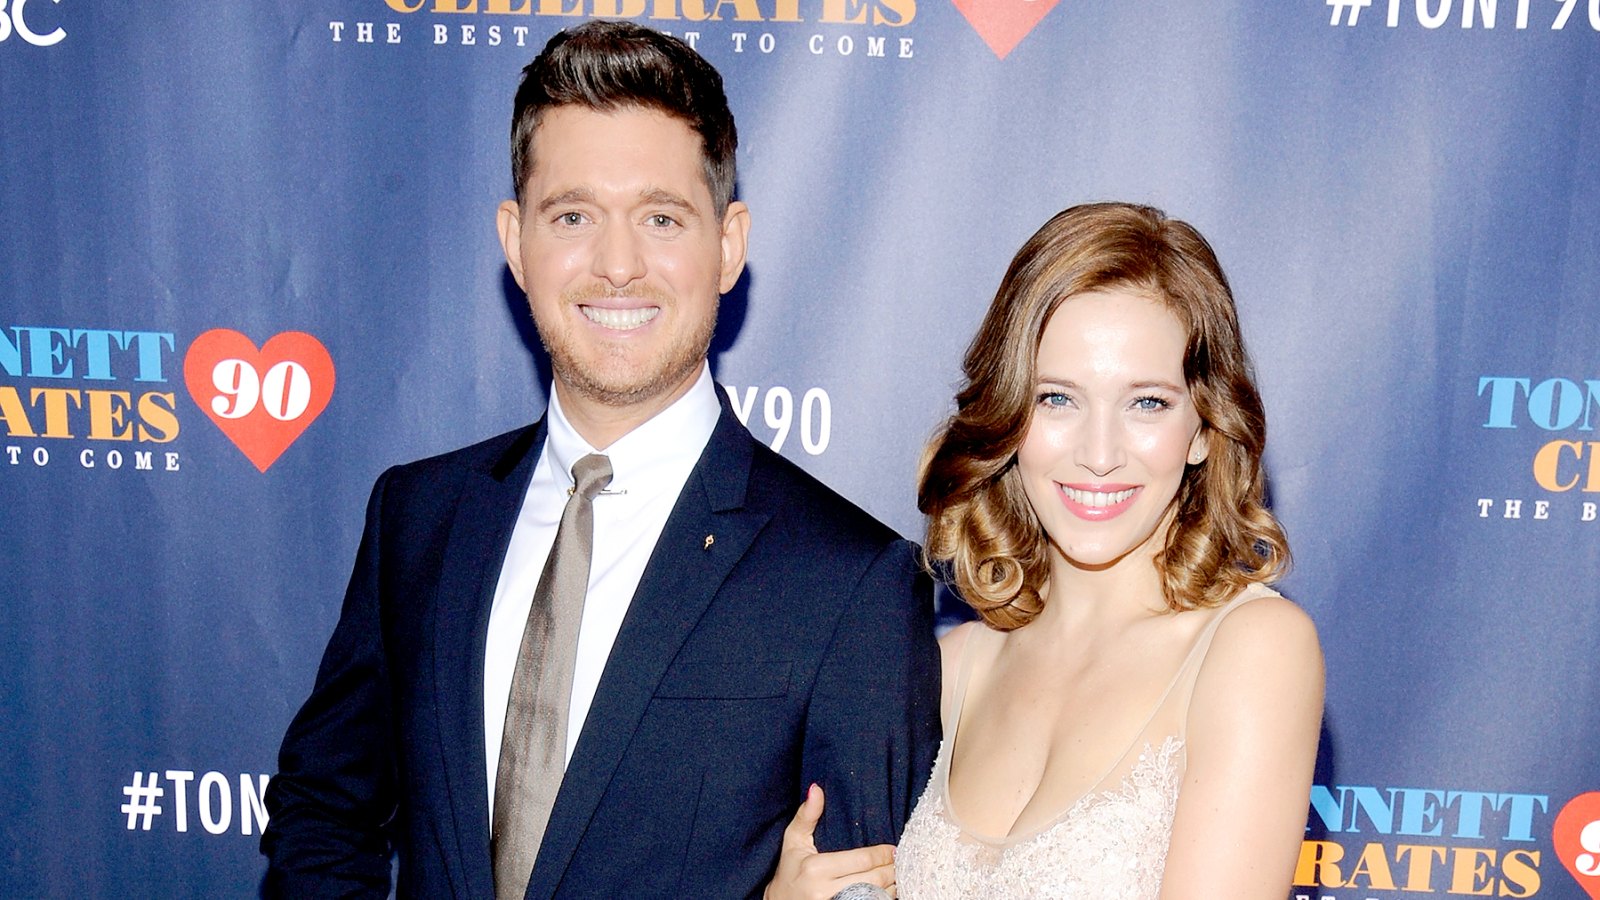 Michael Buble and Luisana Lopilato attend Tony Bennett Celebrates 90: The Best Is Yet To Come at Radio City Music Hall on September 15, 2016 in New York City.